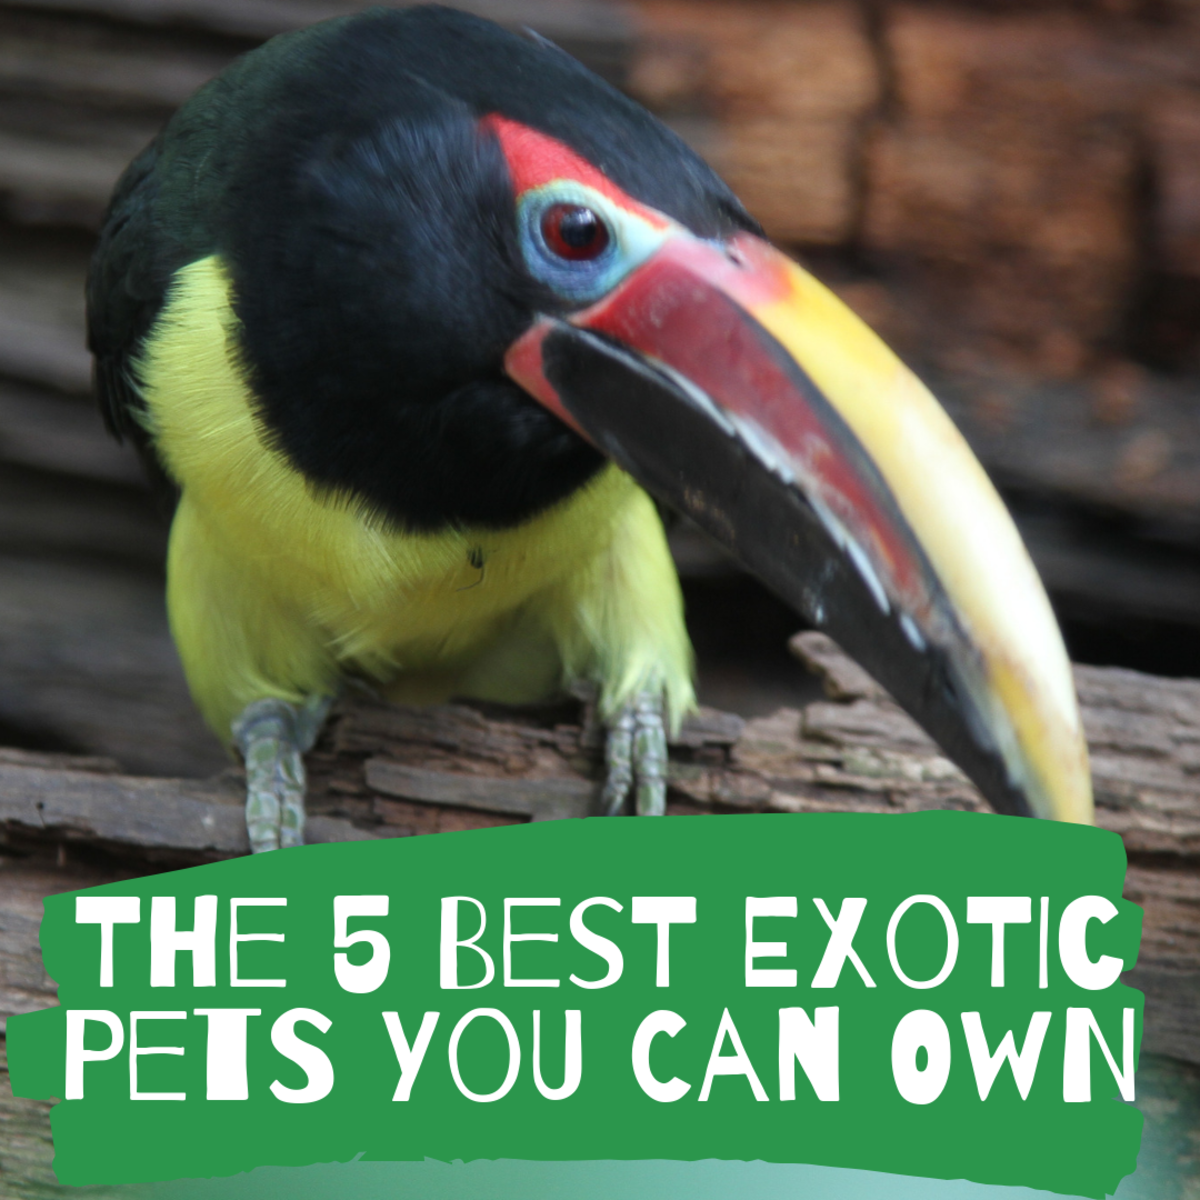 The 5 Best Exotic Pets You Can Own